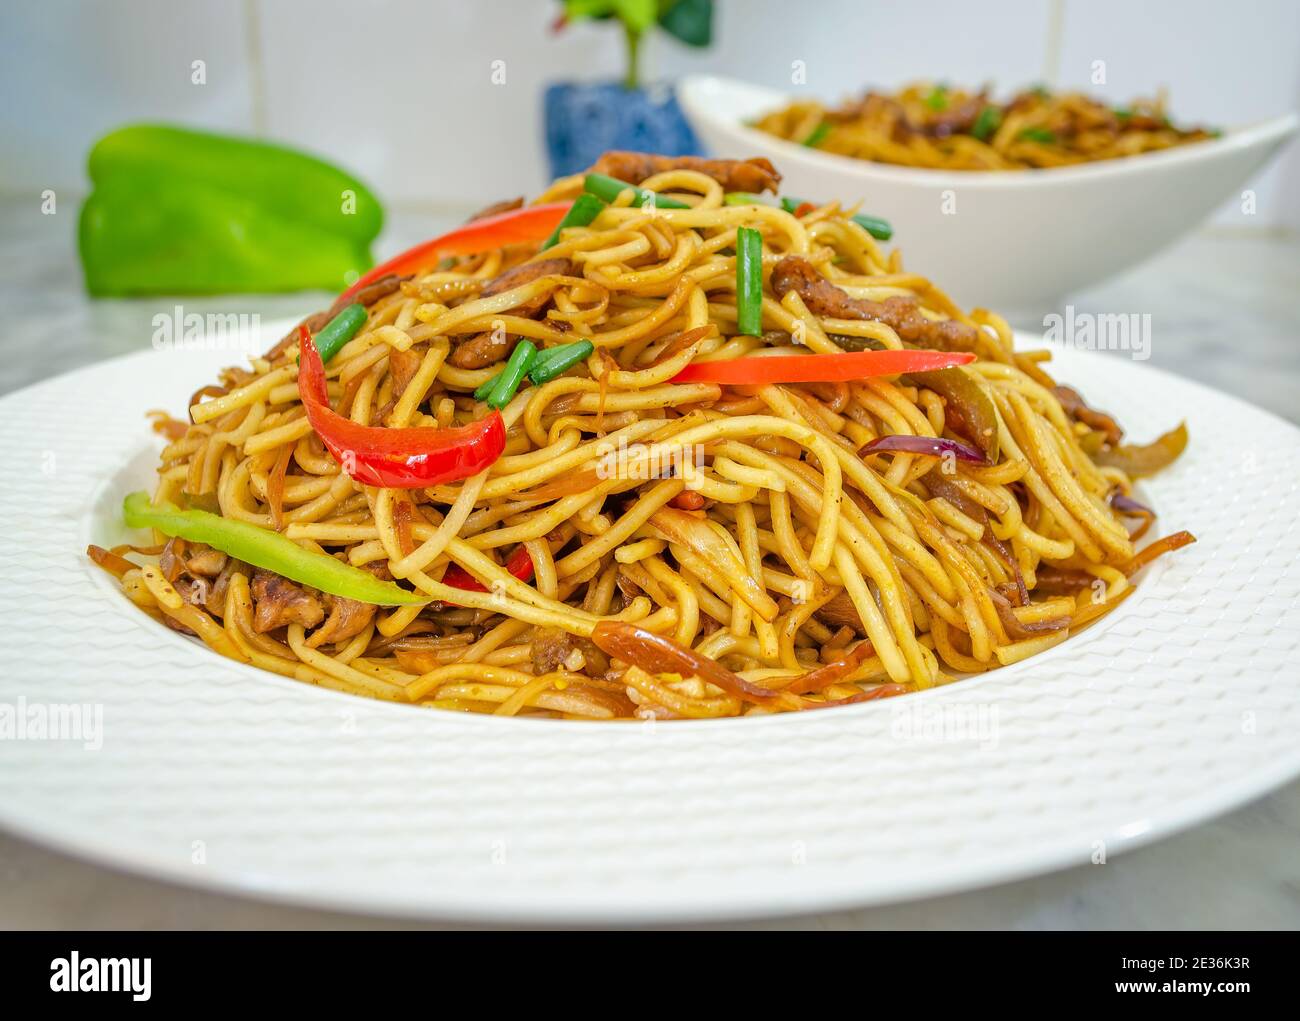 Closeup of beautifully arranged Chicken Noodles garnished with red and green bell peppers and spring onions Stock Photo